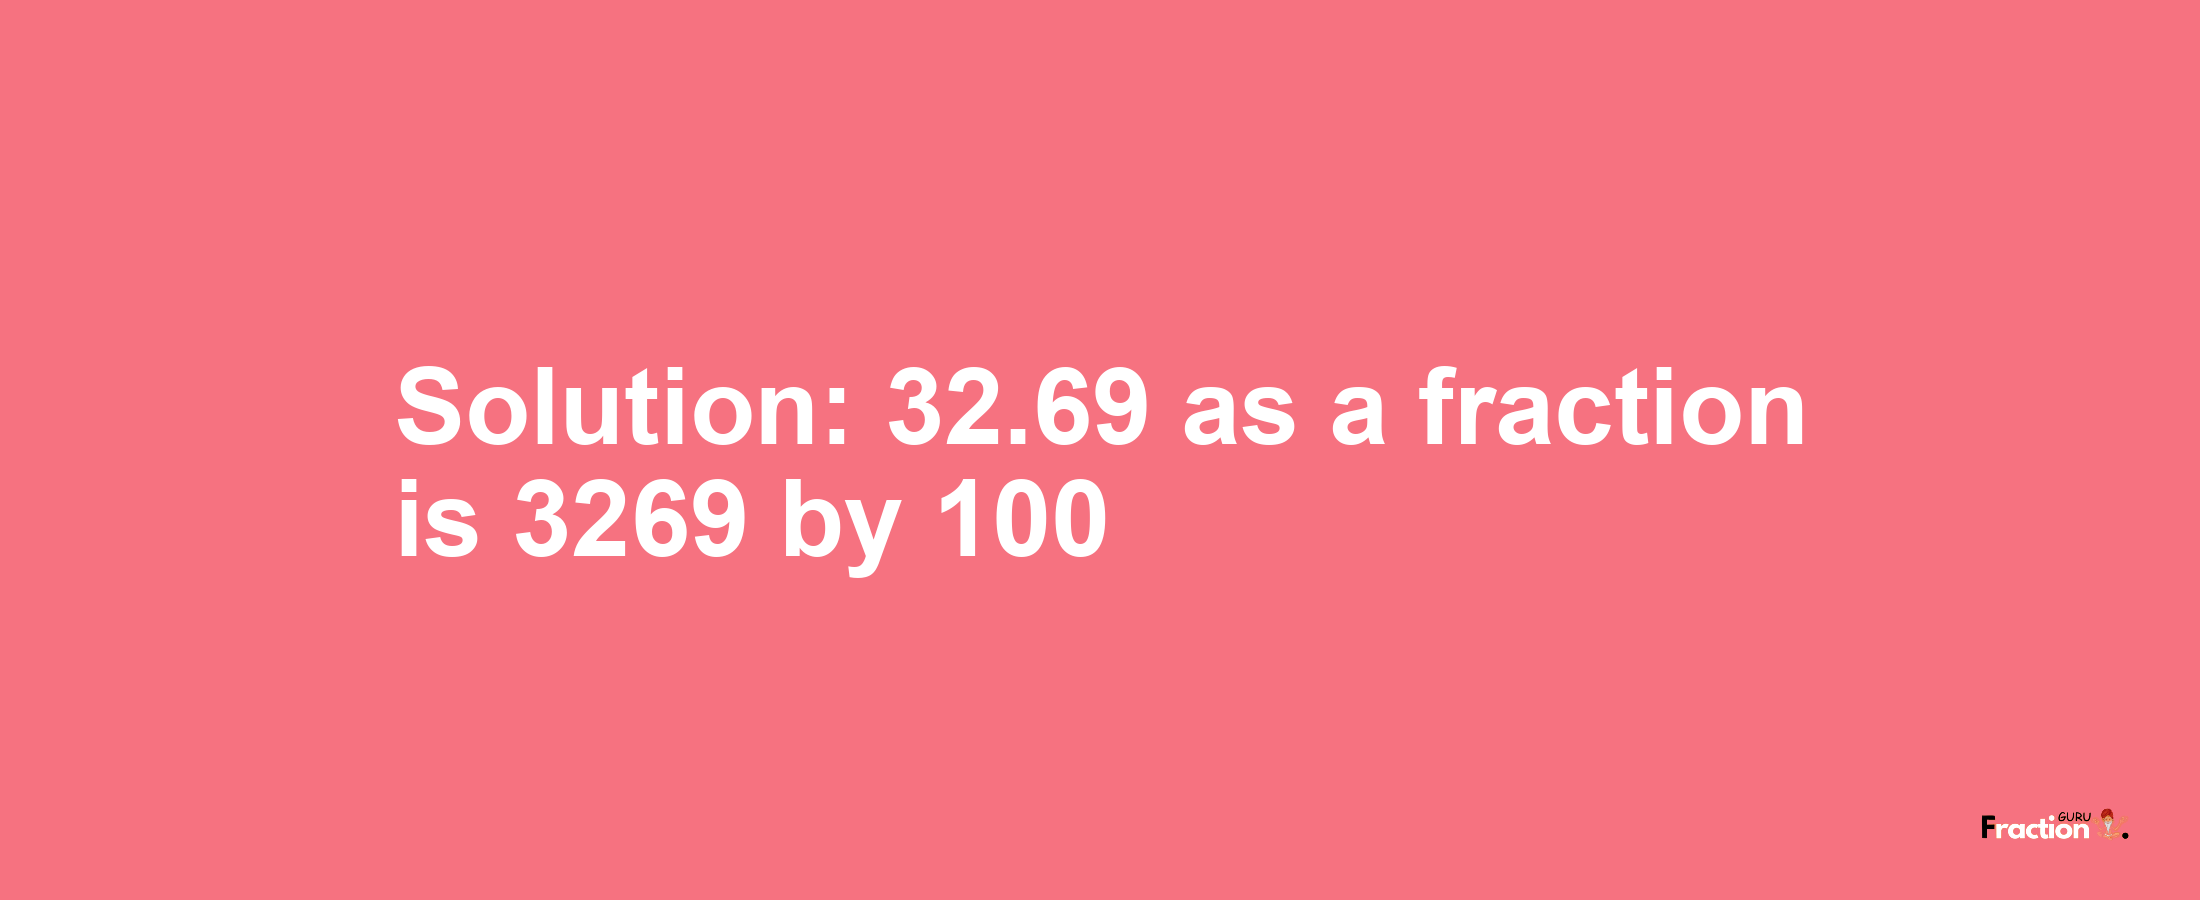 Solution:32.69 as a fraction is 3269/100